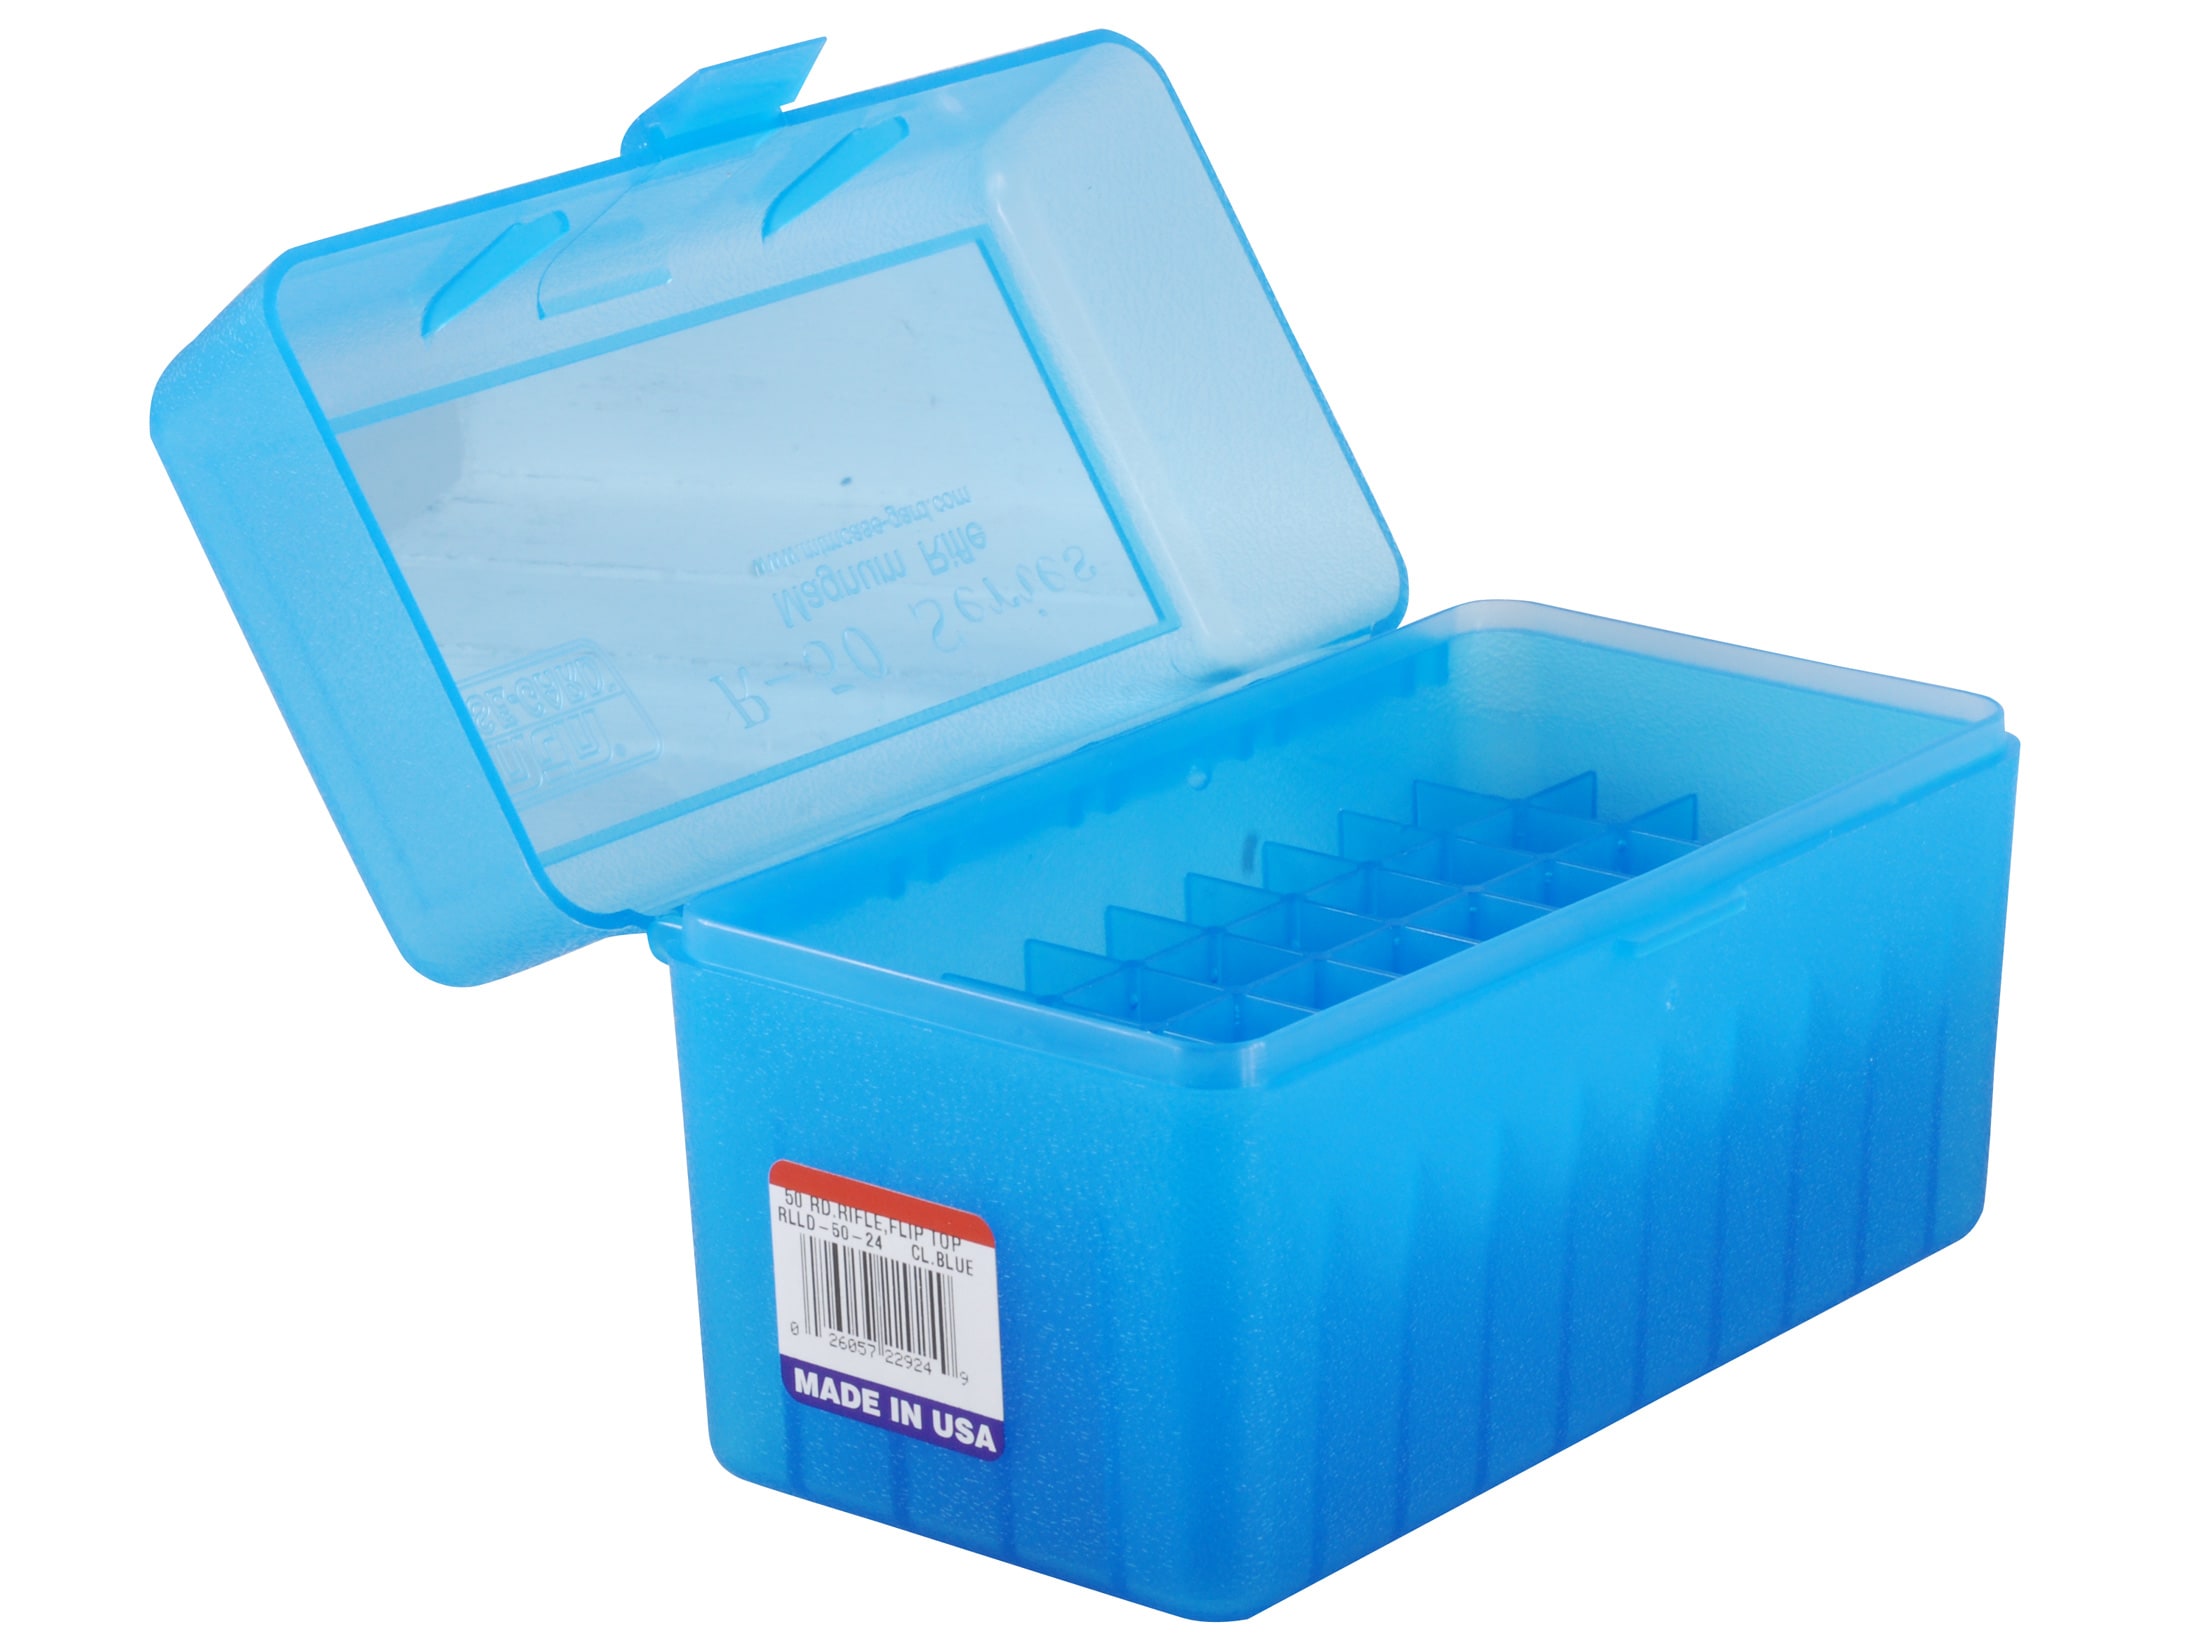 3 50 Rnd Storage Boxes For 303 British FREE SHIPPING BERRY'S PLASTIC AMMO 